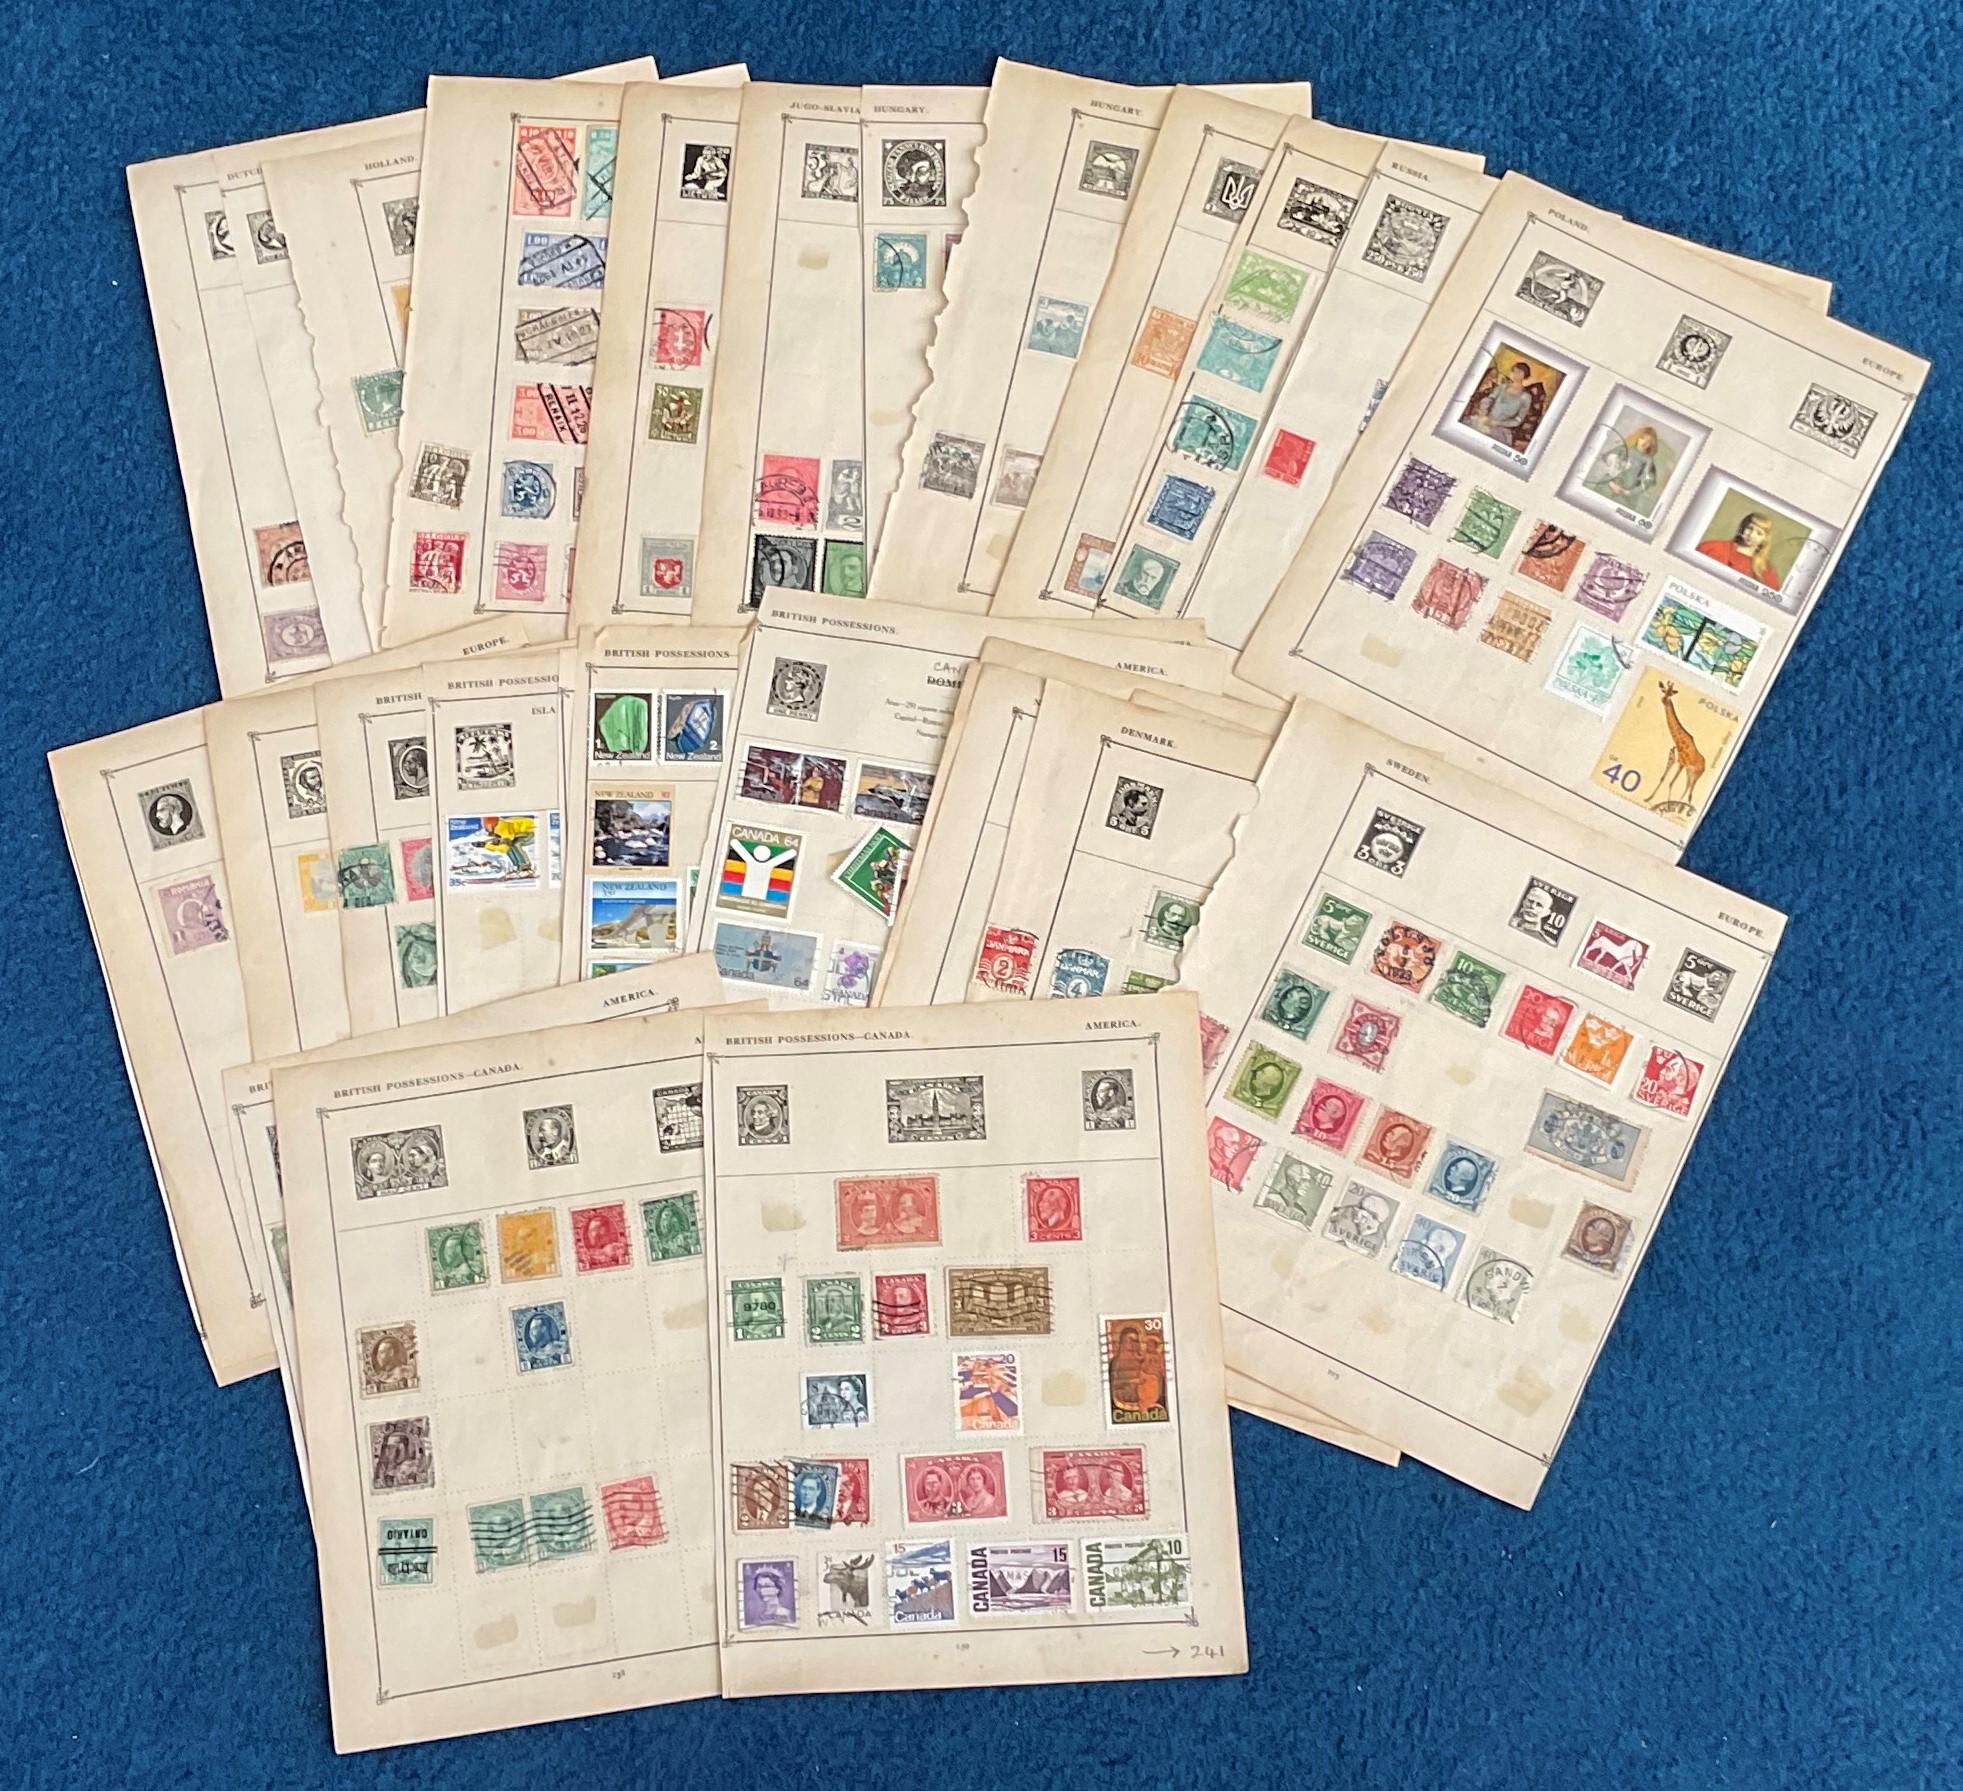 Assorted stamp collection over 51 pages. Includes BCW, East European, Scandinavia and more. Good